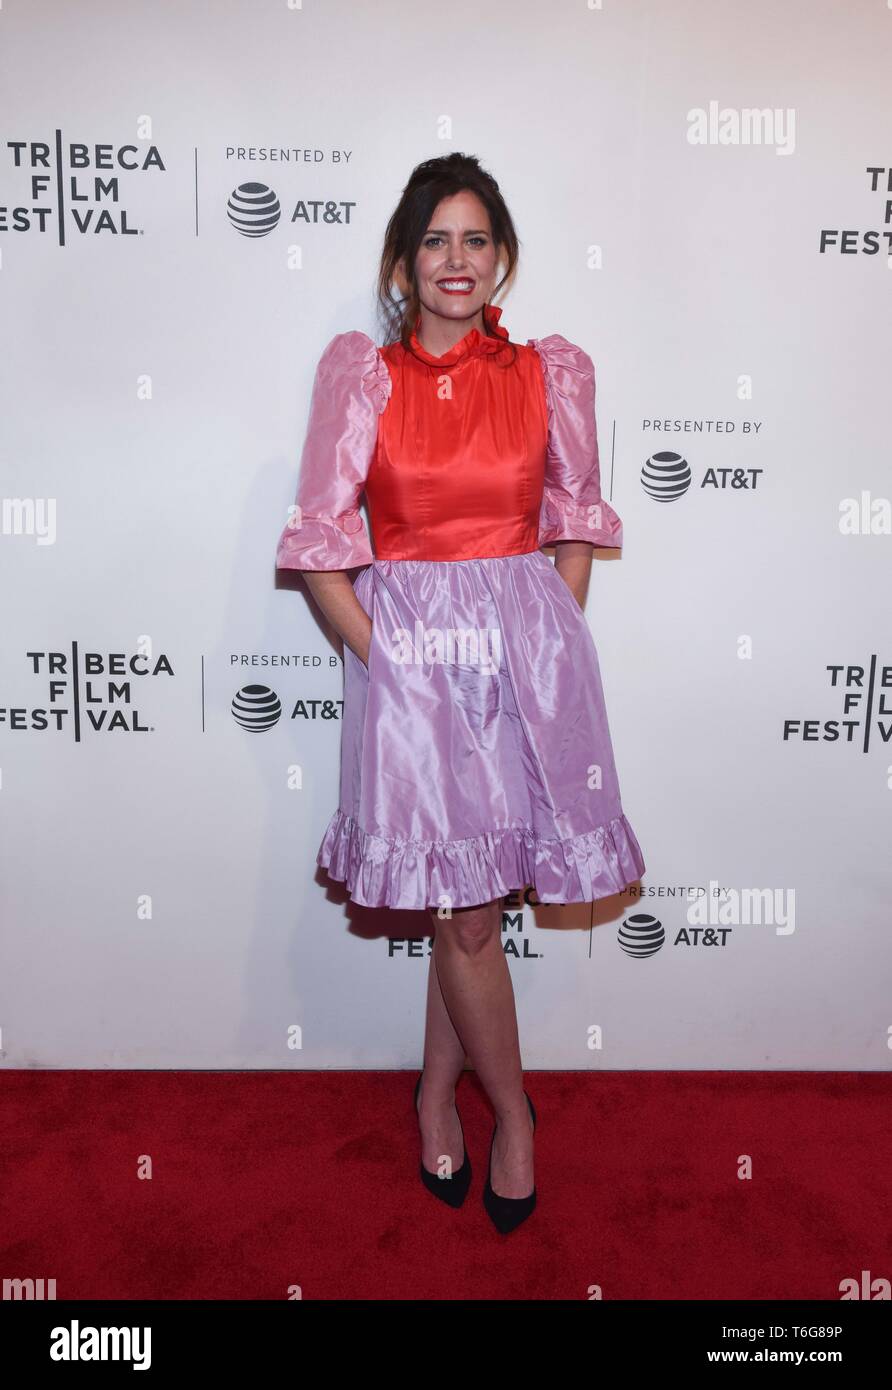 New York, New York, USA. 30th Apr, 2019. Ione Skye attends Say Anything 30 year anniversary during the 2019 Tribeca Film Festival at The Stella Artois Theatre Credit: Bmcc Tpac On April 30, 2019 In New York City. Photo: Jeremy Smith/Image Space/Media Punch/Alamy Live News Stock Photo